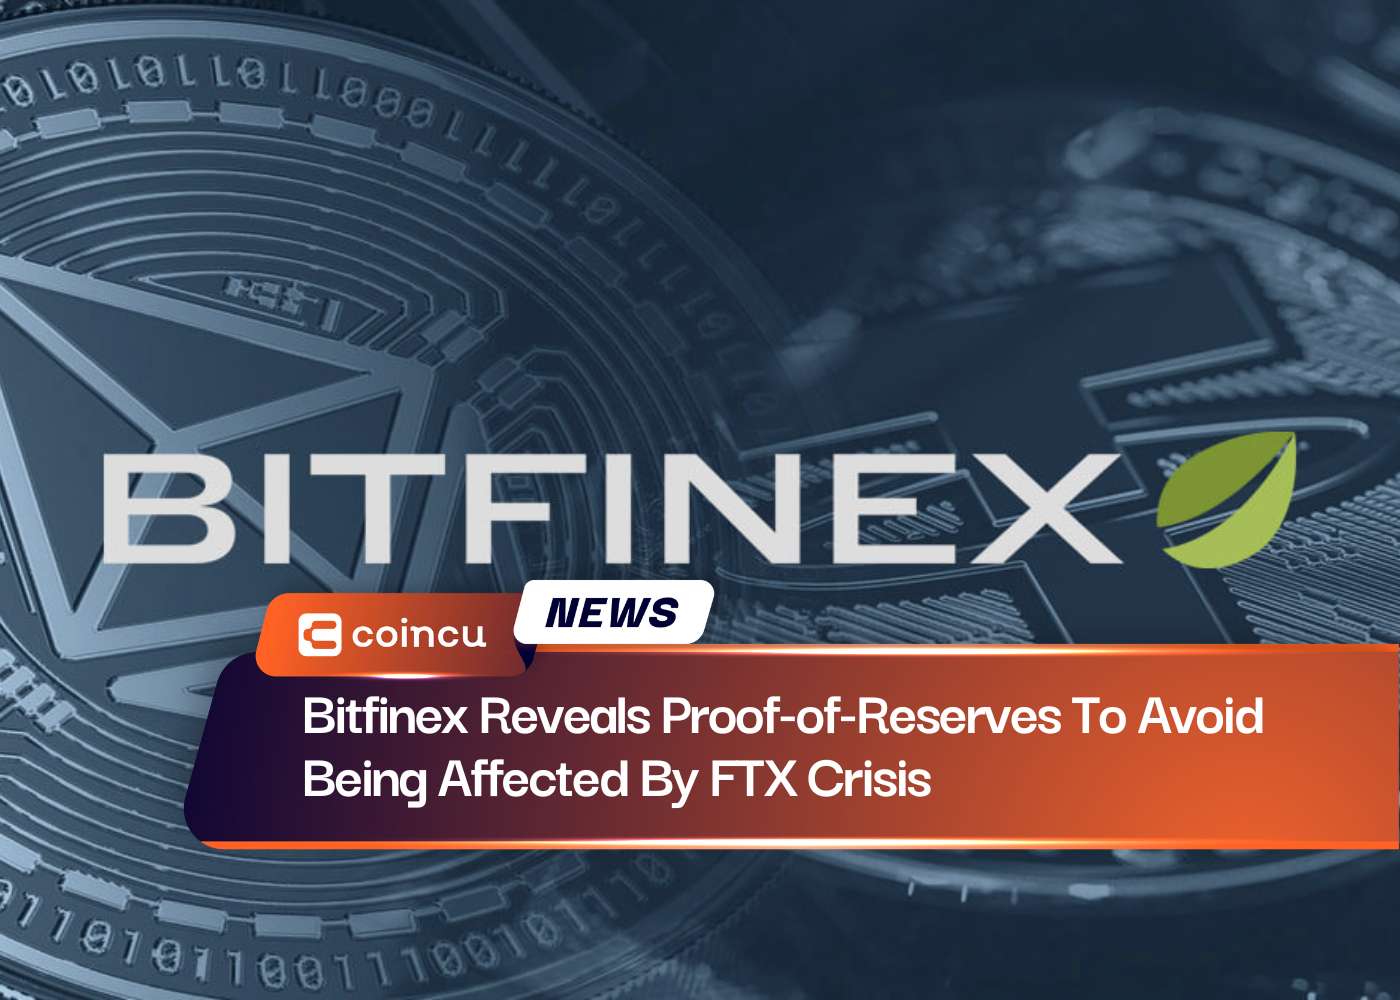 Bitfinex Reveals Proof-of-Reserves To Avoid Being Affected By FTX Crisis